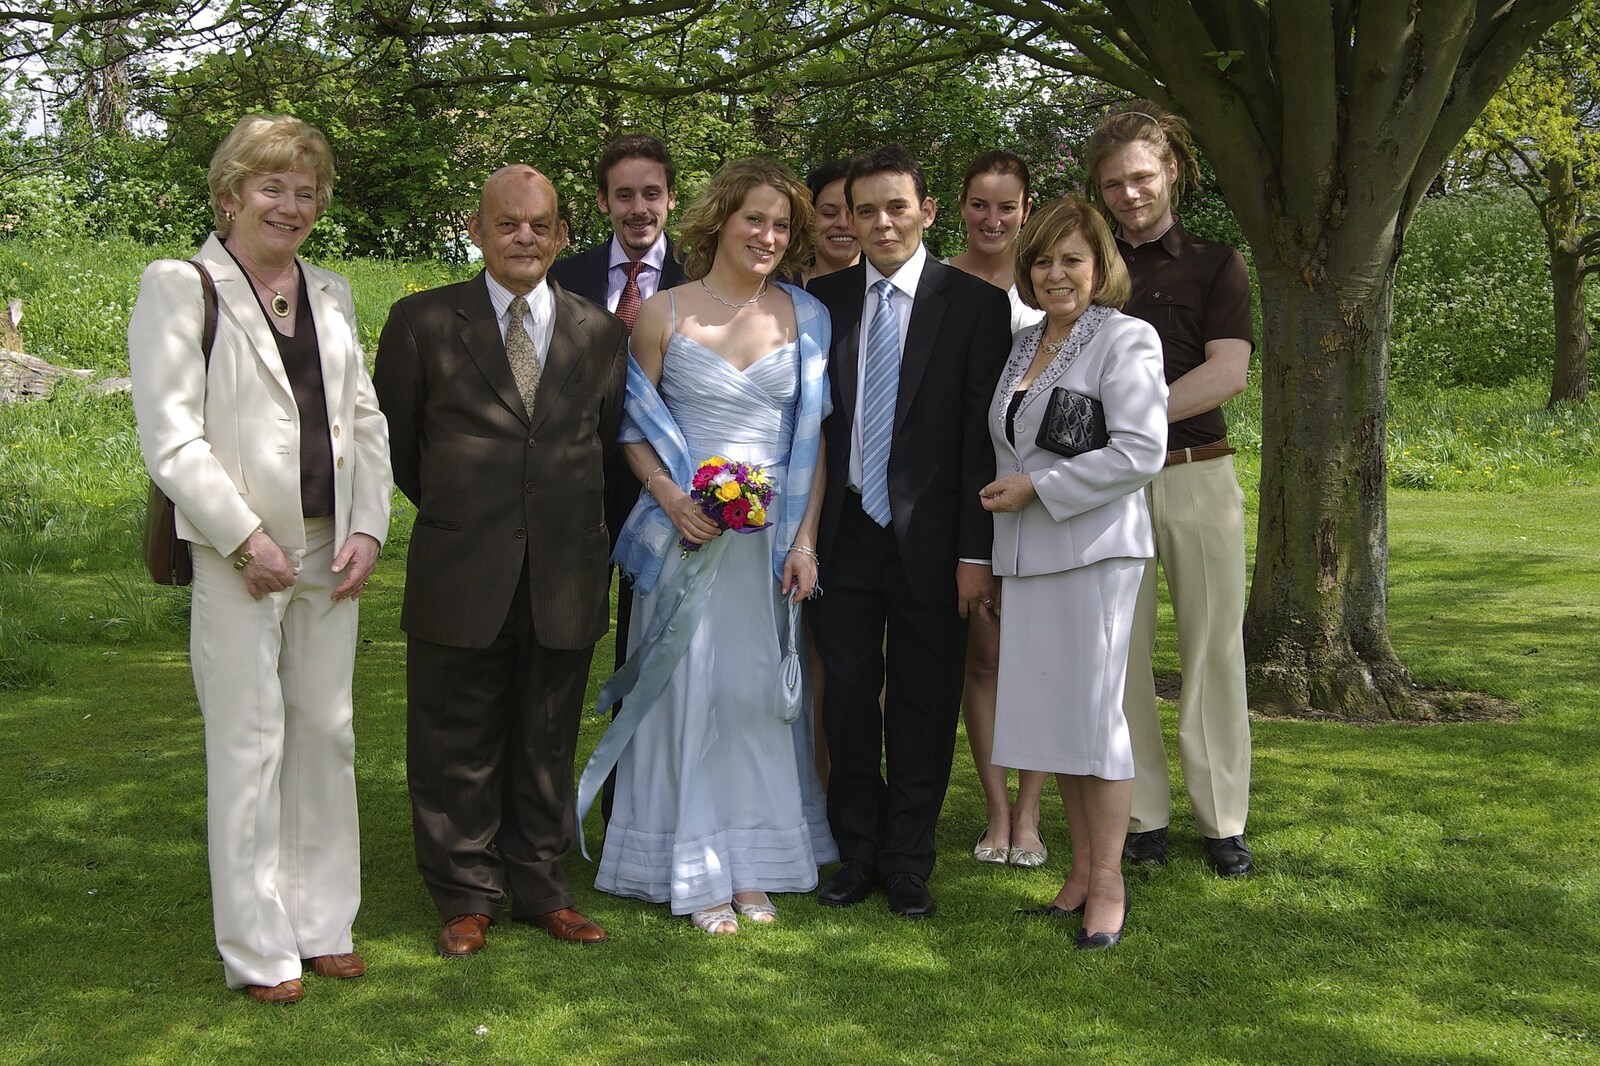 Hani and Anne's Wedding, County Hall, Cambridge - 2nd May 2008: Family snapshot